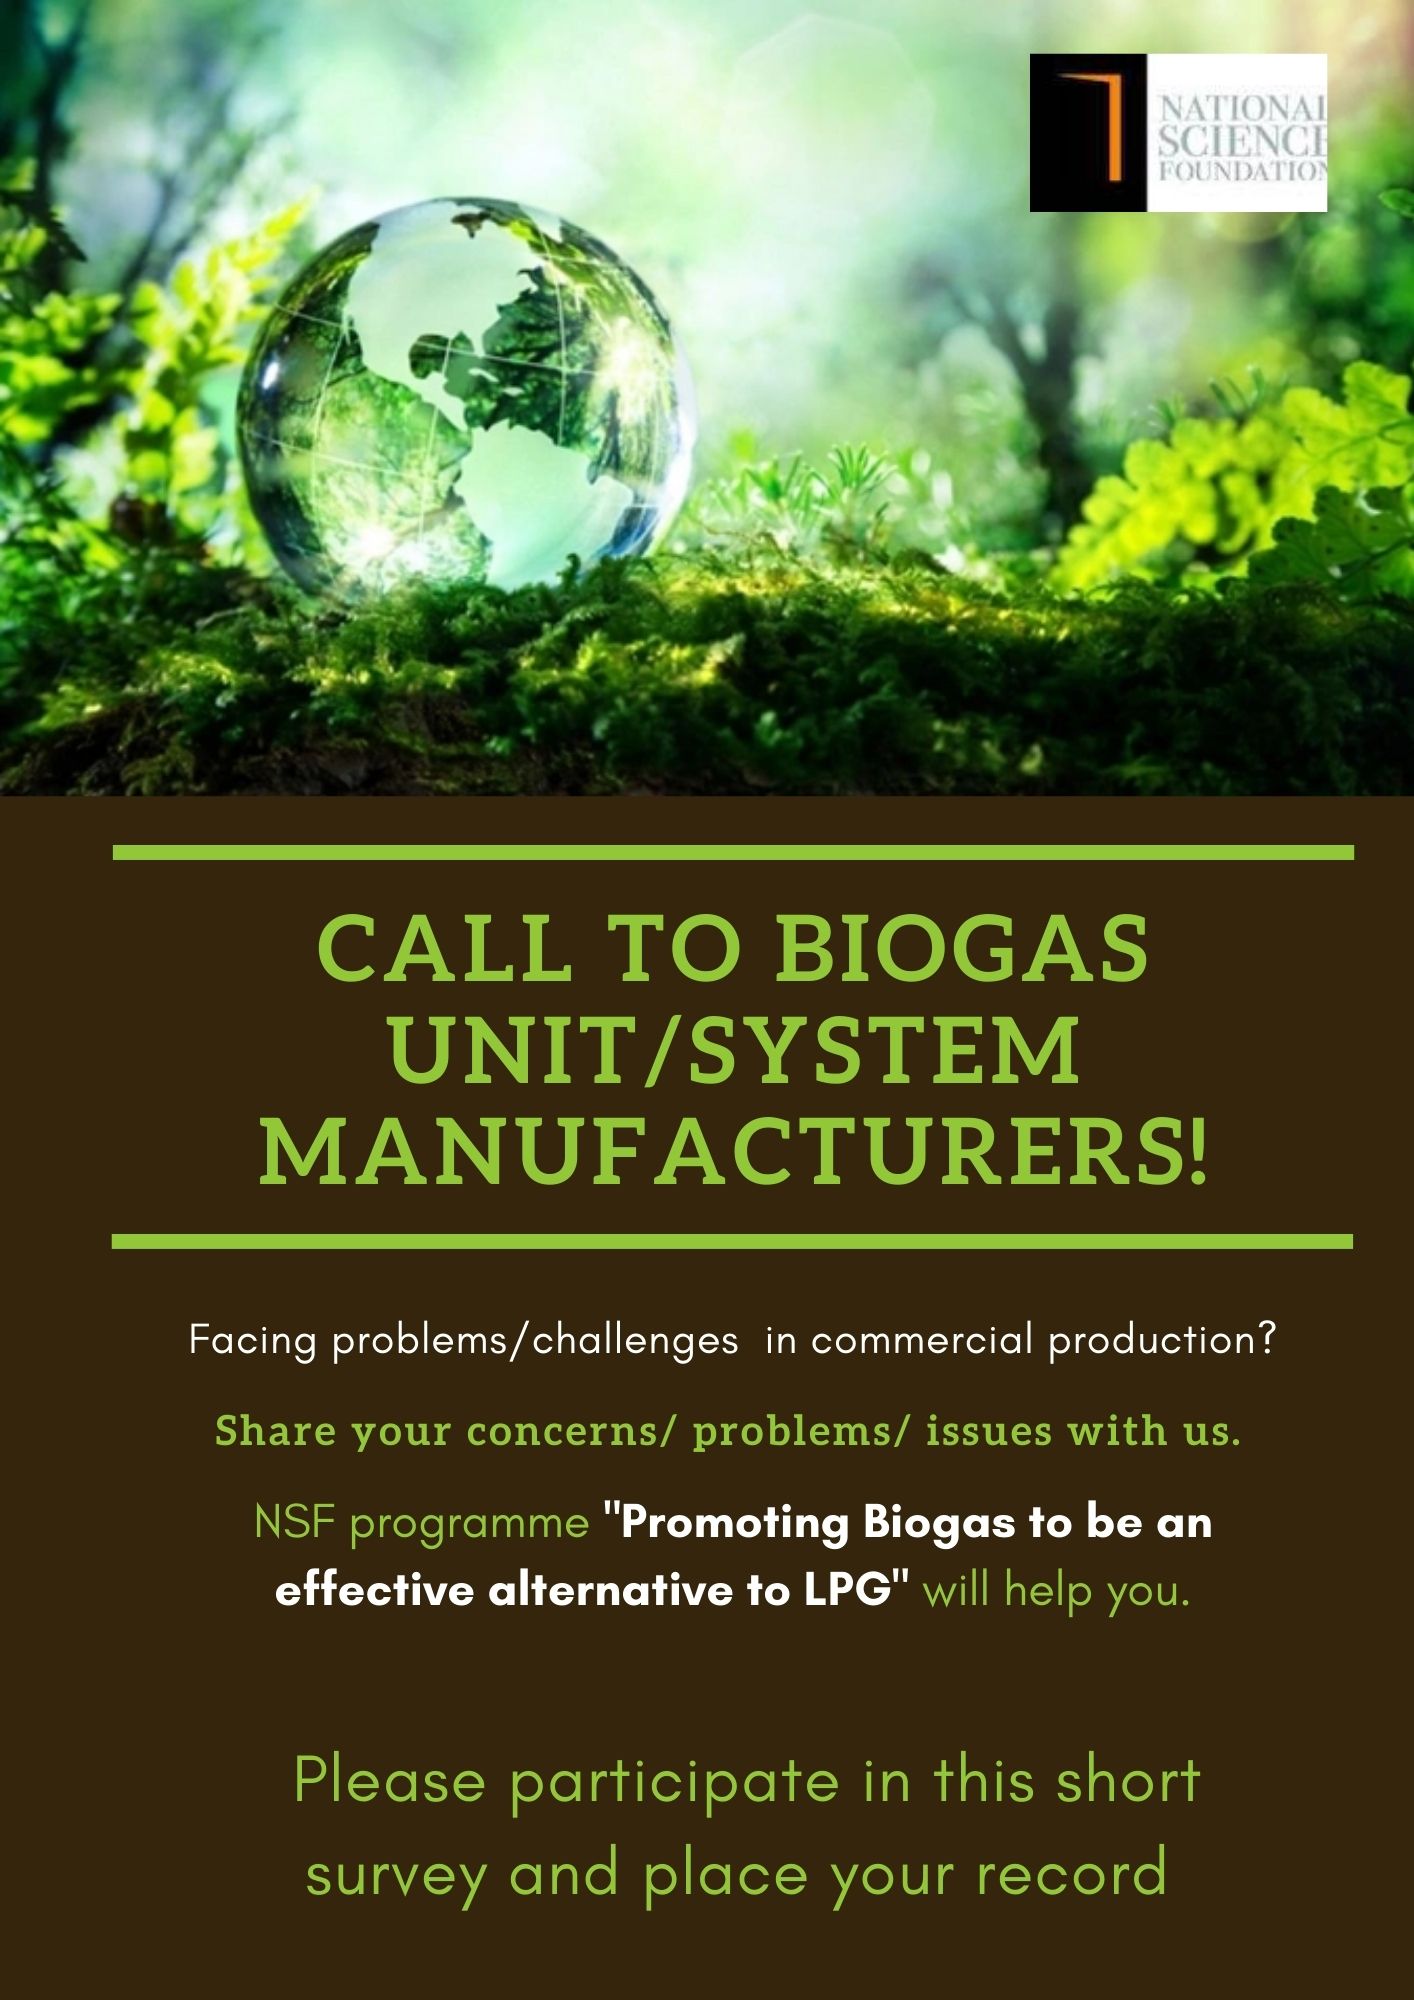 Call to Biogas Unit System Manufactures